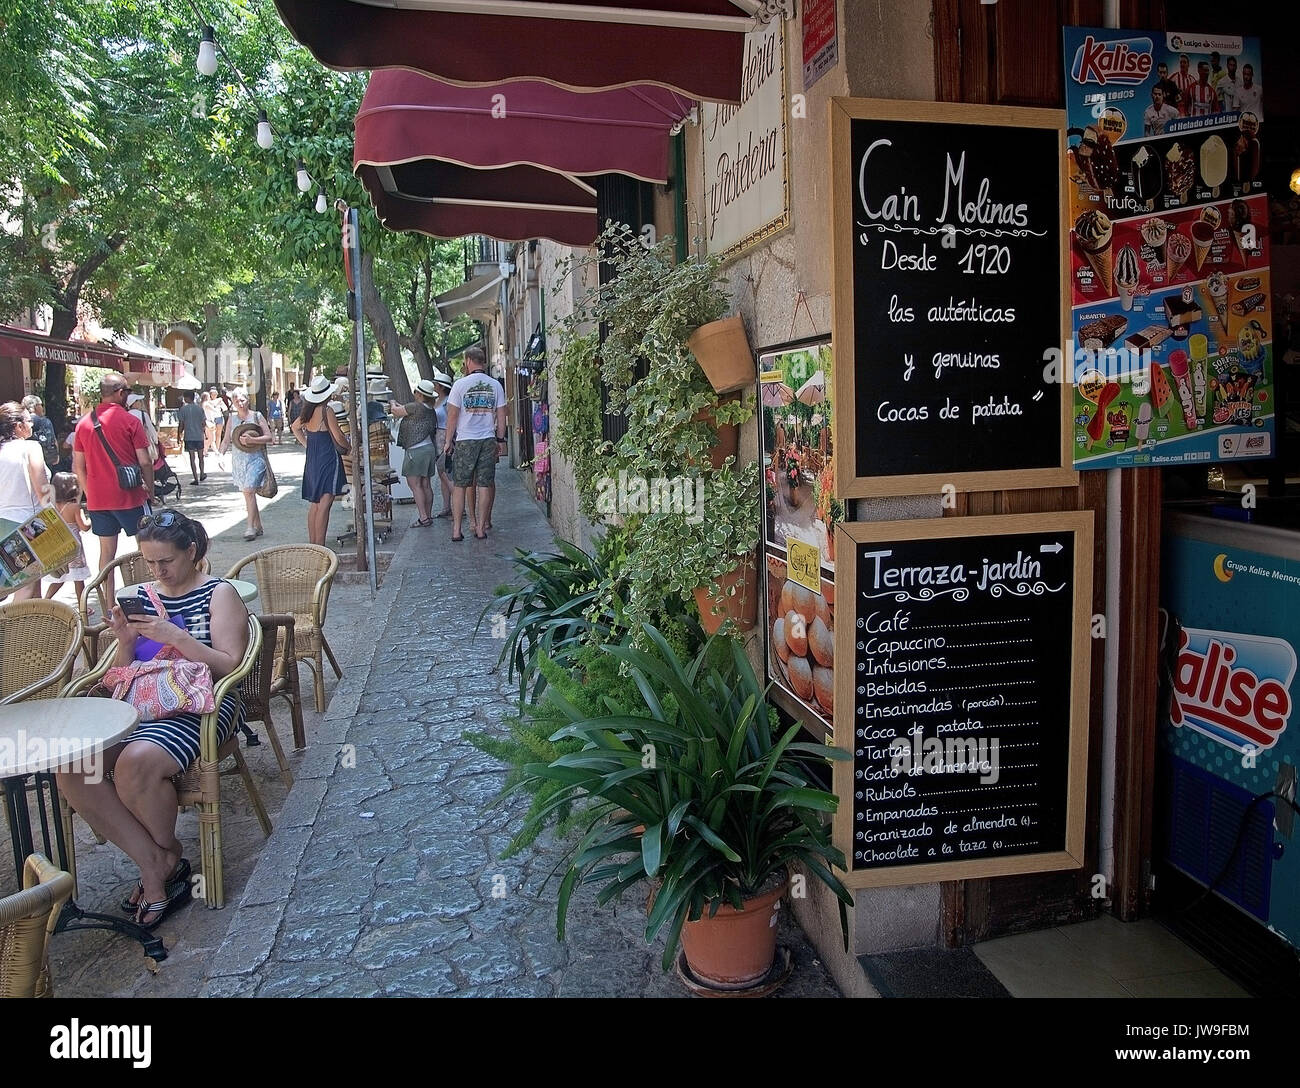 VALLDEMOSSA, BALEARIC ISLANDS, SPAIN - JULY 13, 2017: Can Molinas cafe details in Valldemossa town on a sunny day on July 13, 2017 in Palma de Mallorc Stock Photo